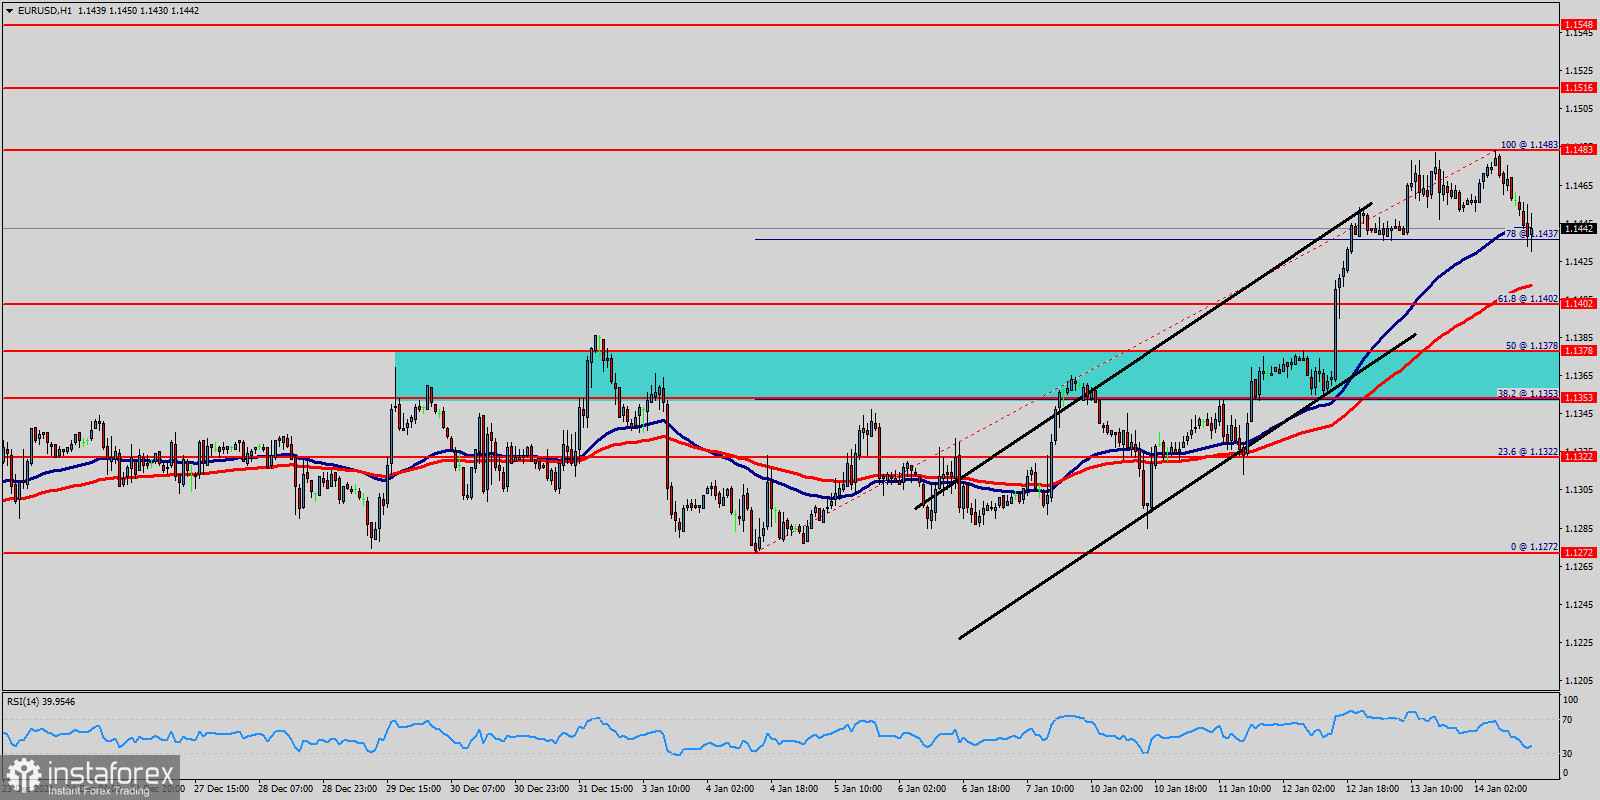 Technical analysis of EUR/USD for January 14, 2022